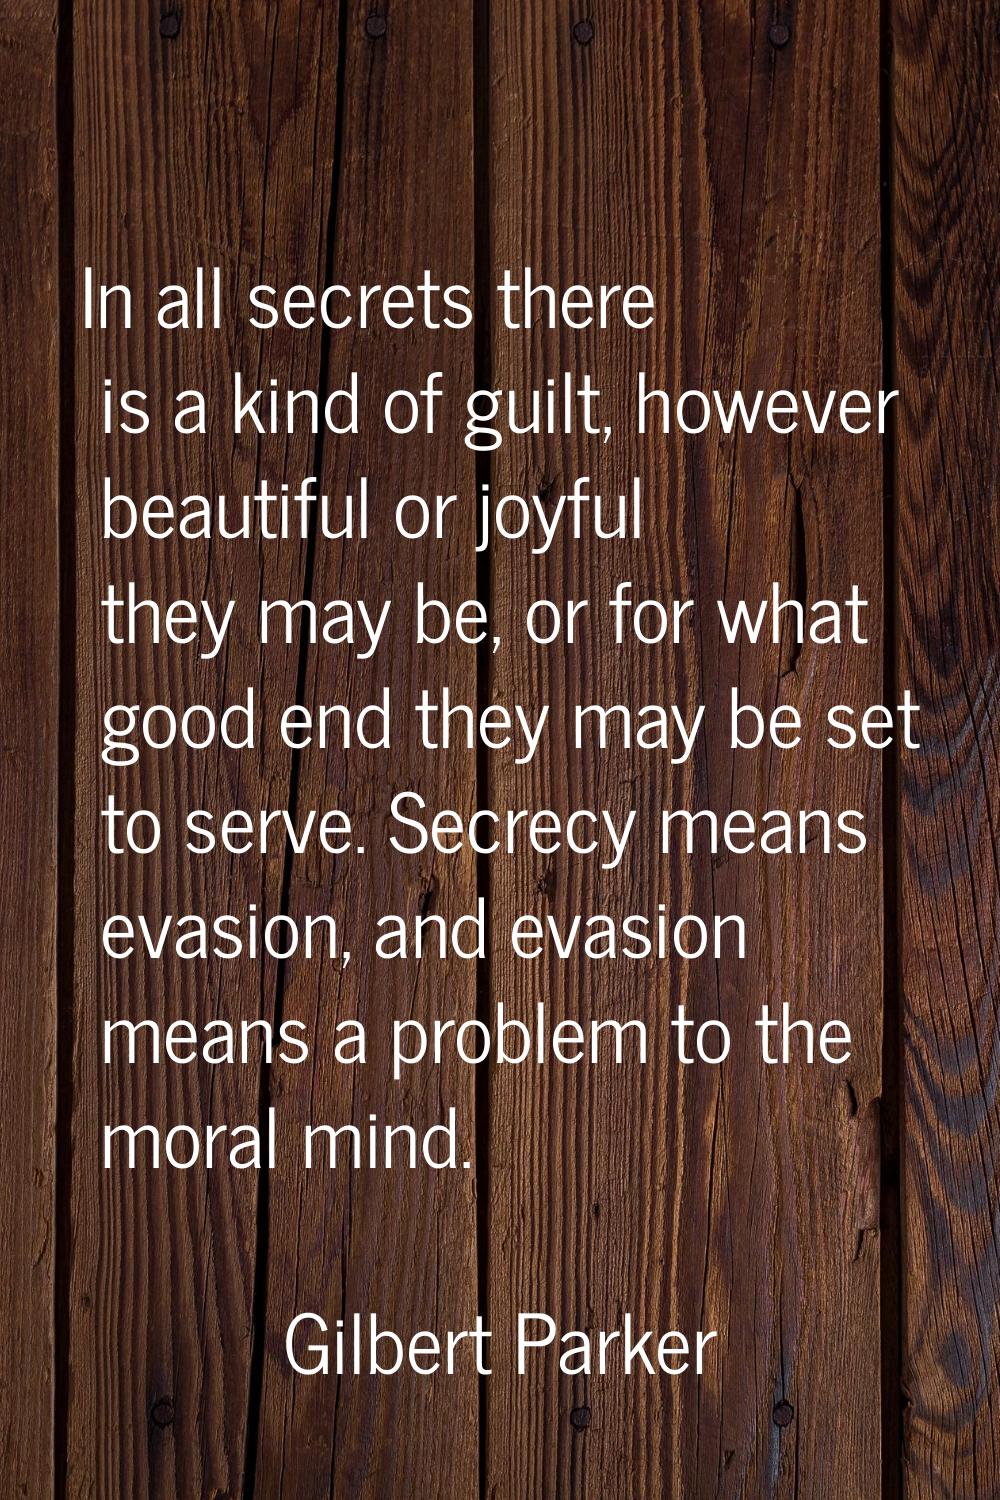 In all secrets there is a kind of guilt, however beautiful or joyful they may be, or for what good 